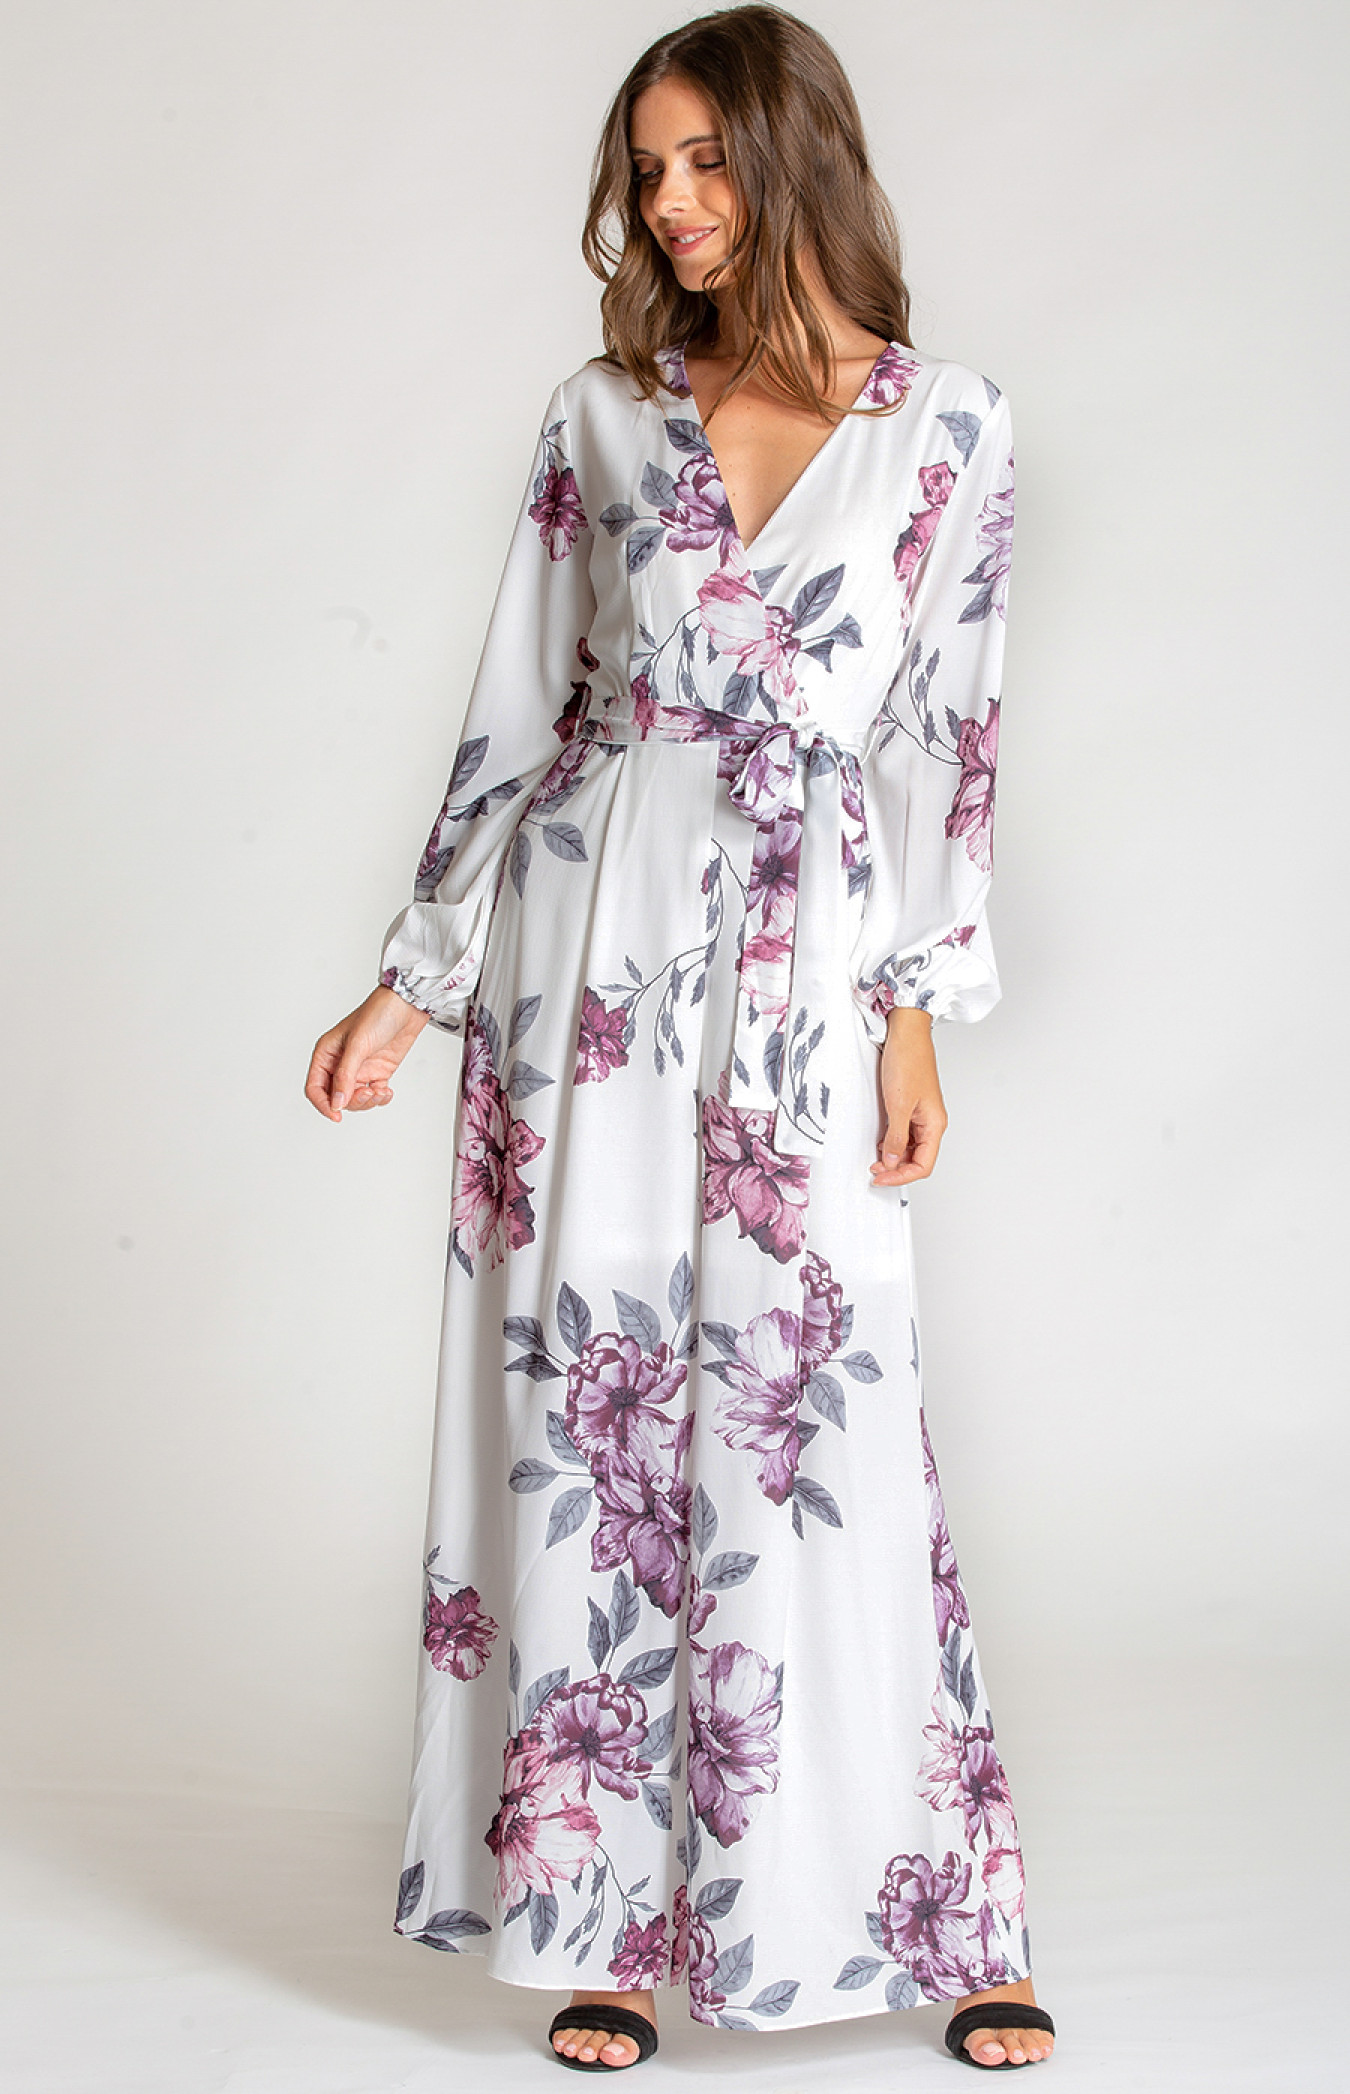 13 Stunning Floral Jumpsuit Outfit Ideas for Summer - Pretty Designs